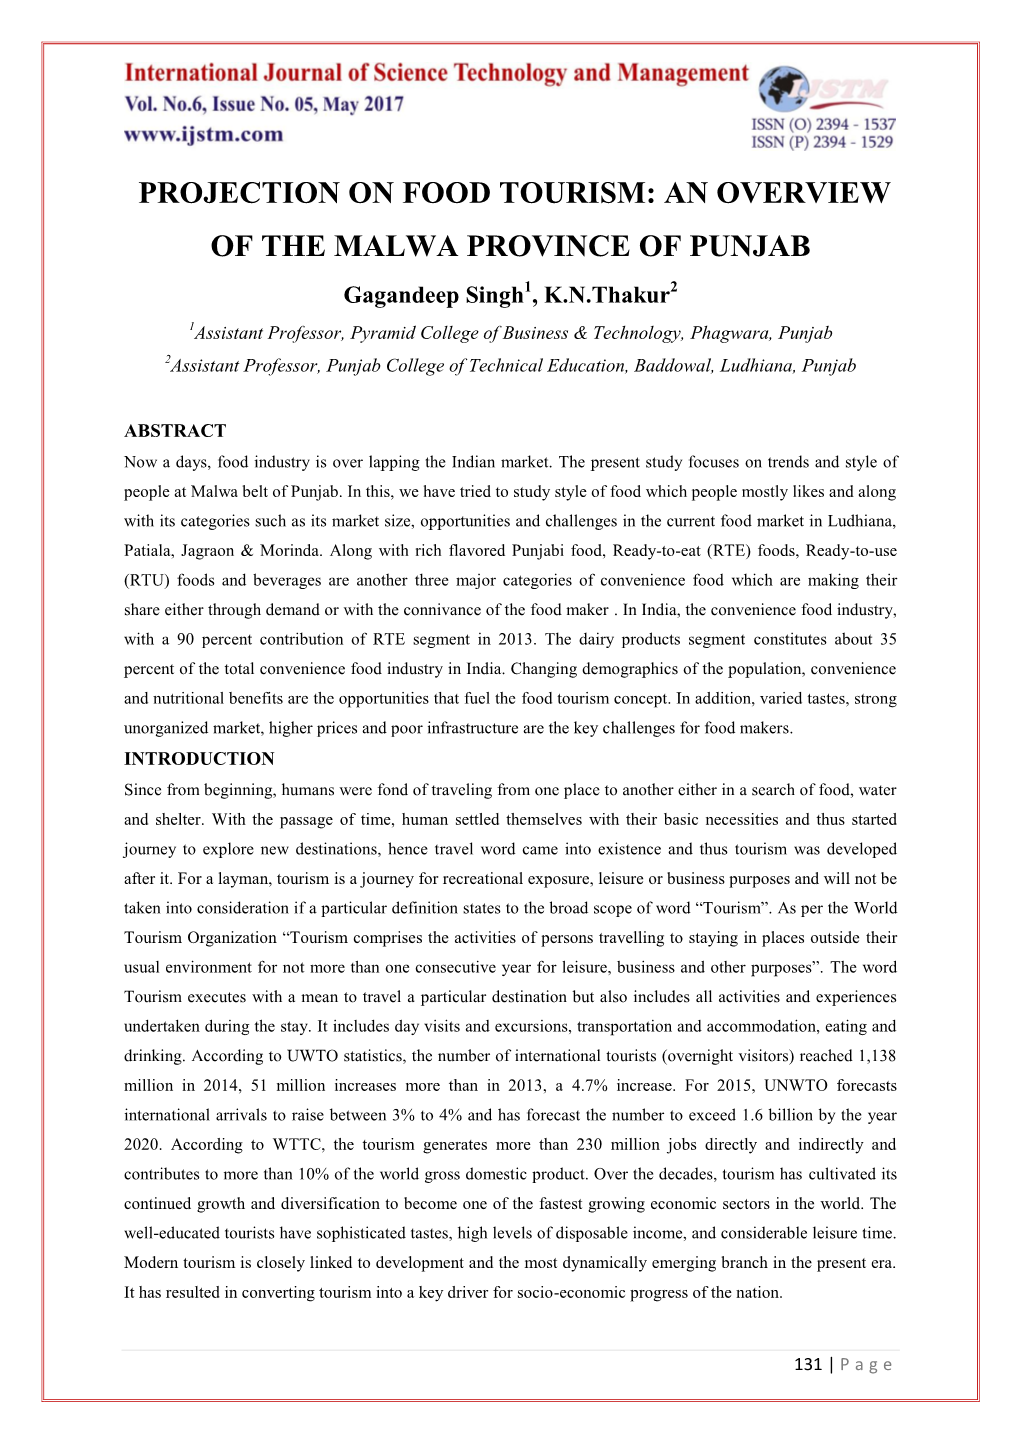 PROJECTION on FOOD TOURISM: an OVERVIEW of the MALWA PROVINCE of PUNJAB Gagandeep Singh1, K.N.Thakur2